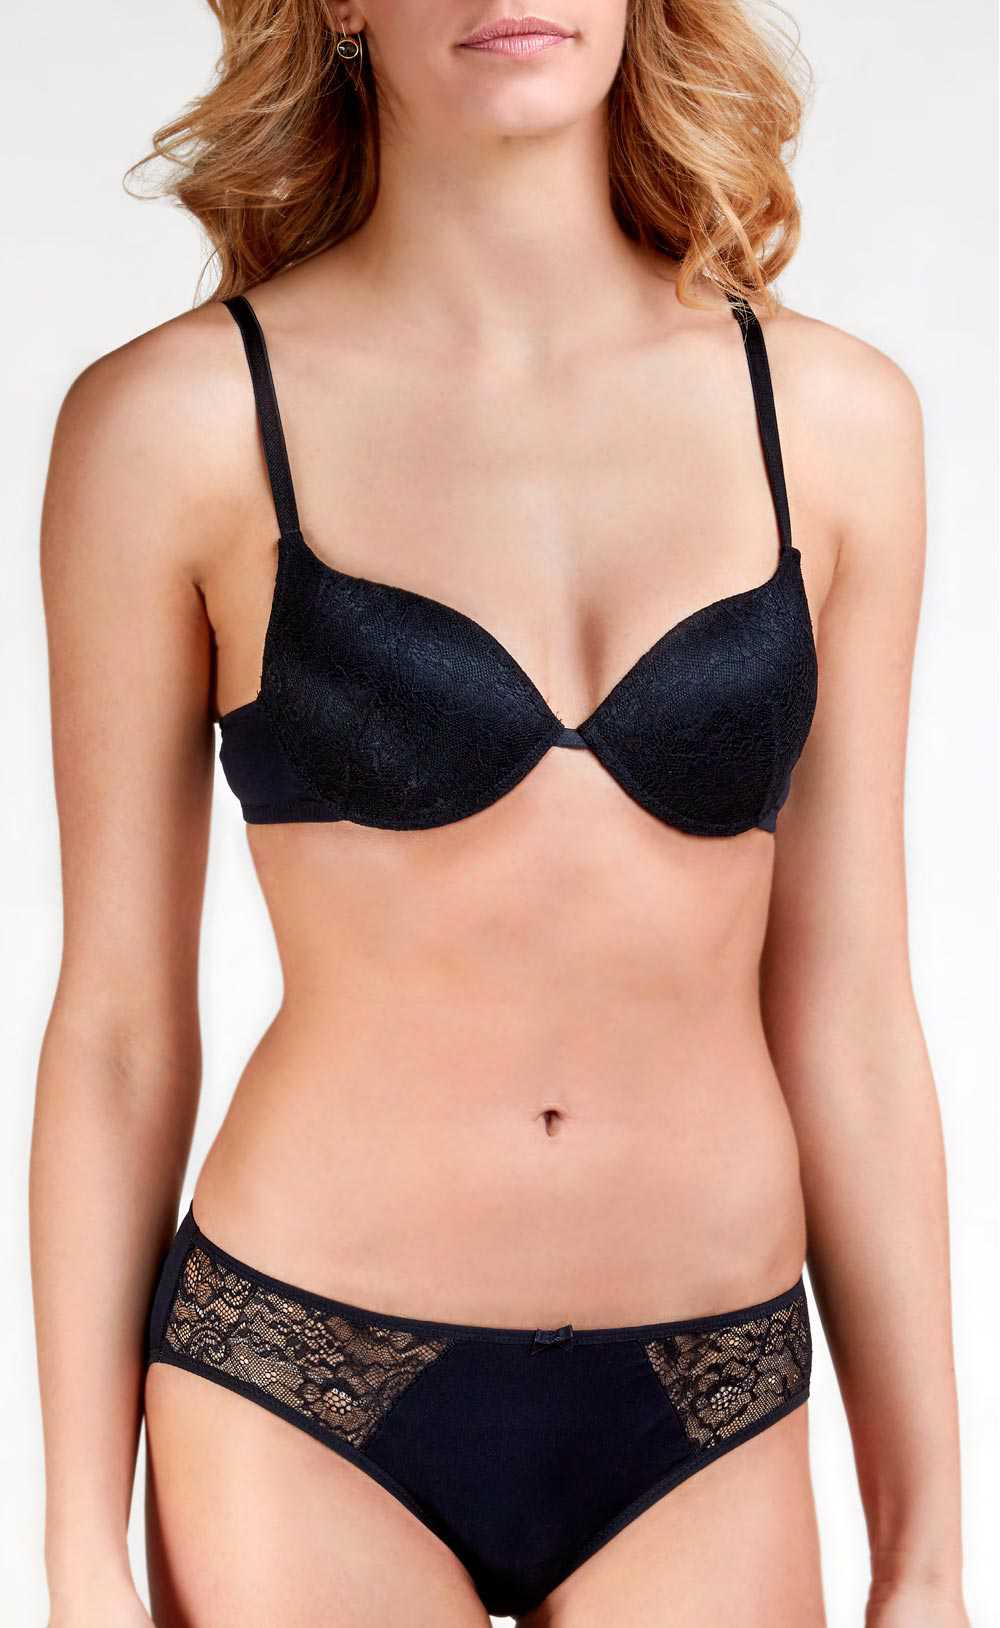 Golden Lady Completo Intimo